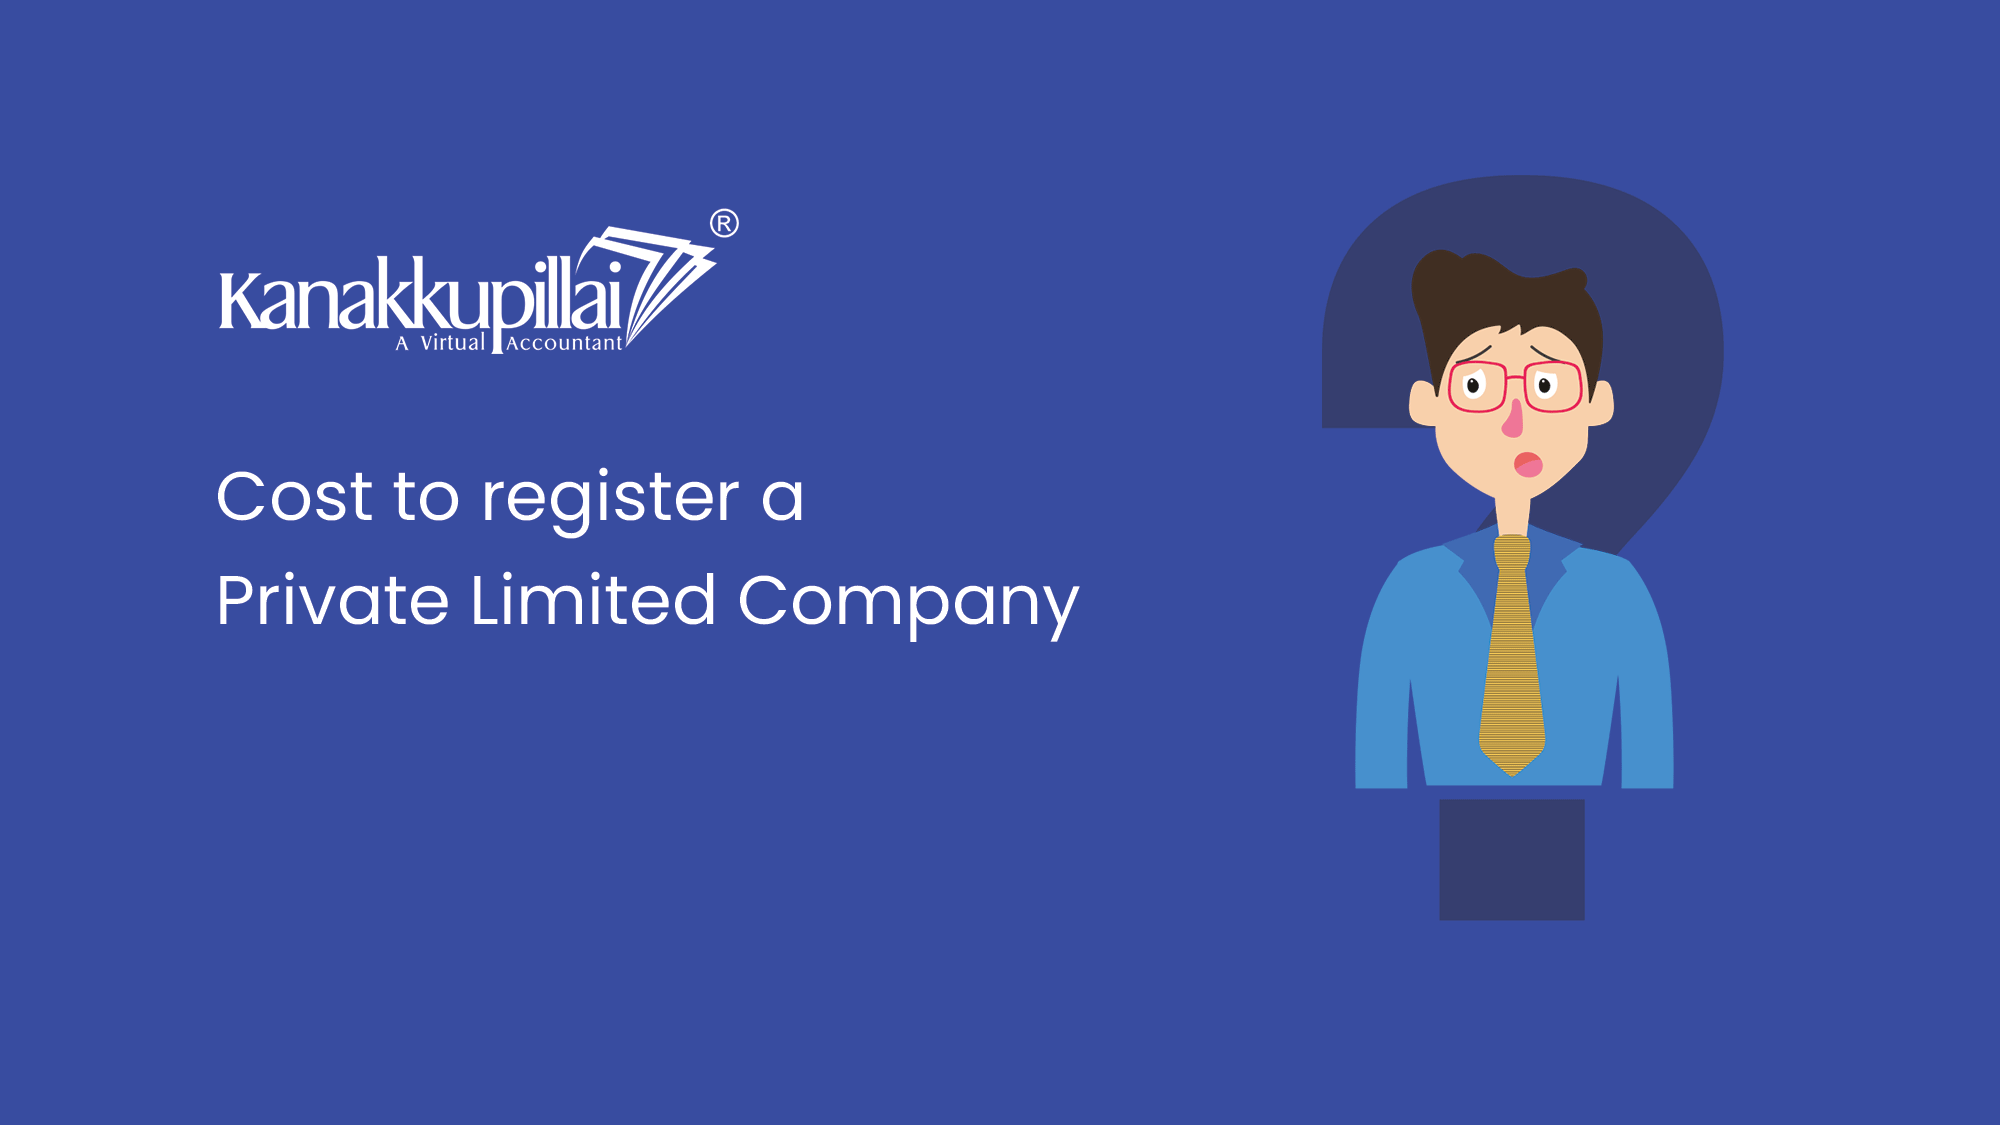 What is the Cost to register a Private Limited Company in India?